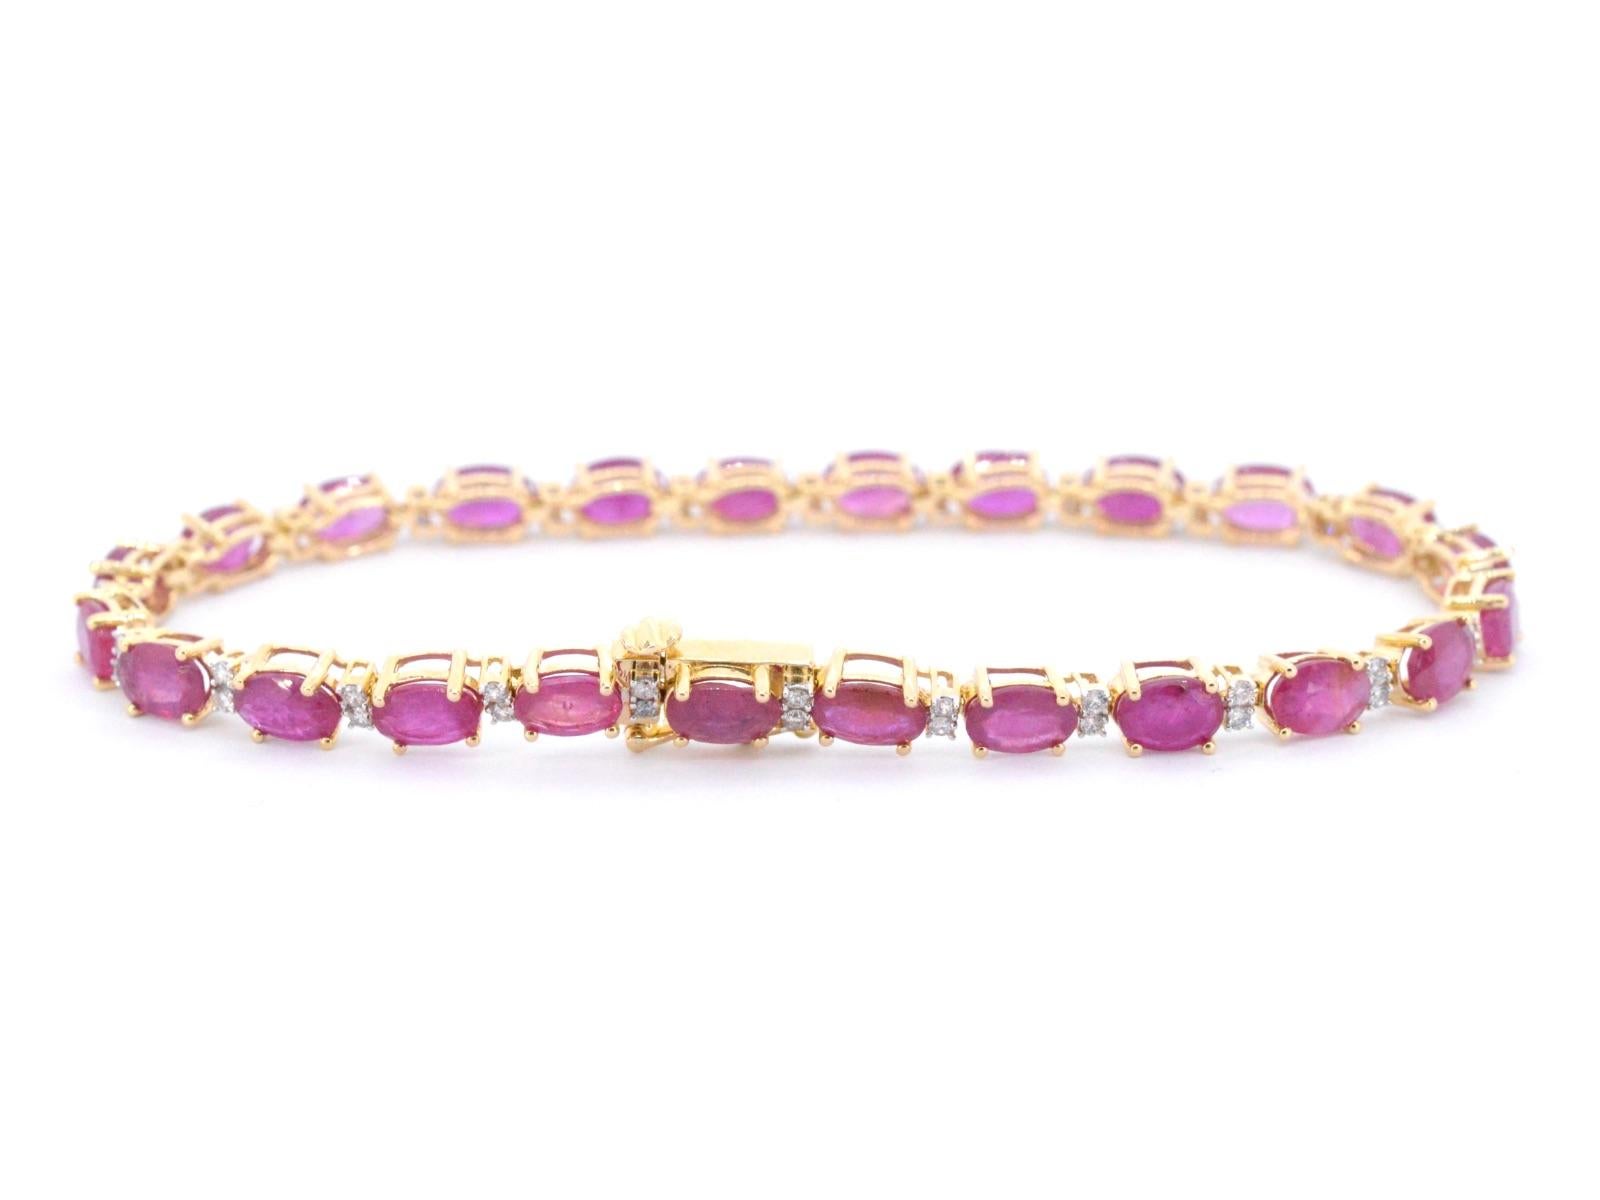 Introducing our stunning yellow gold tennis bracelet, adorned with diamonds and a beautiful ruby gemstone. Crafted with care and precision, this piece boasts a weight of 10 grams and a hallmark of 14 karat 585. The bracelet is 18cm in length, making